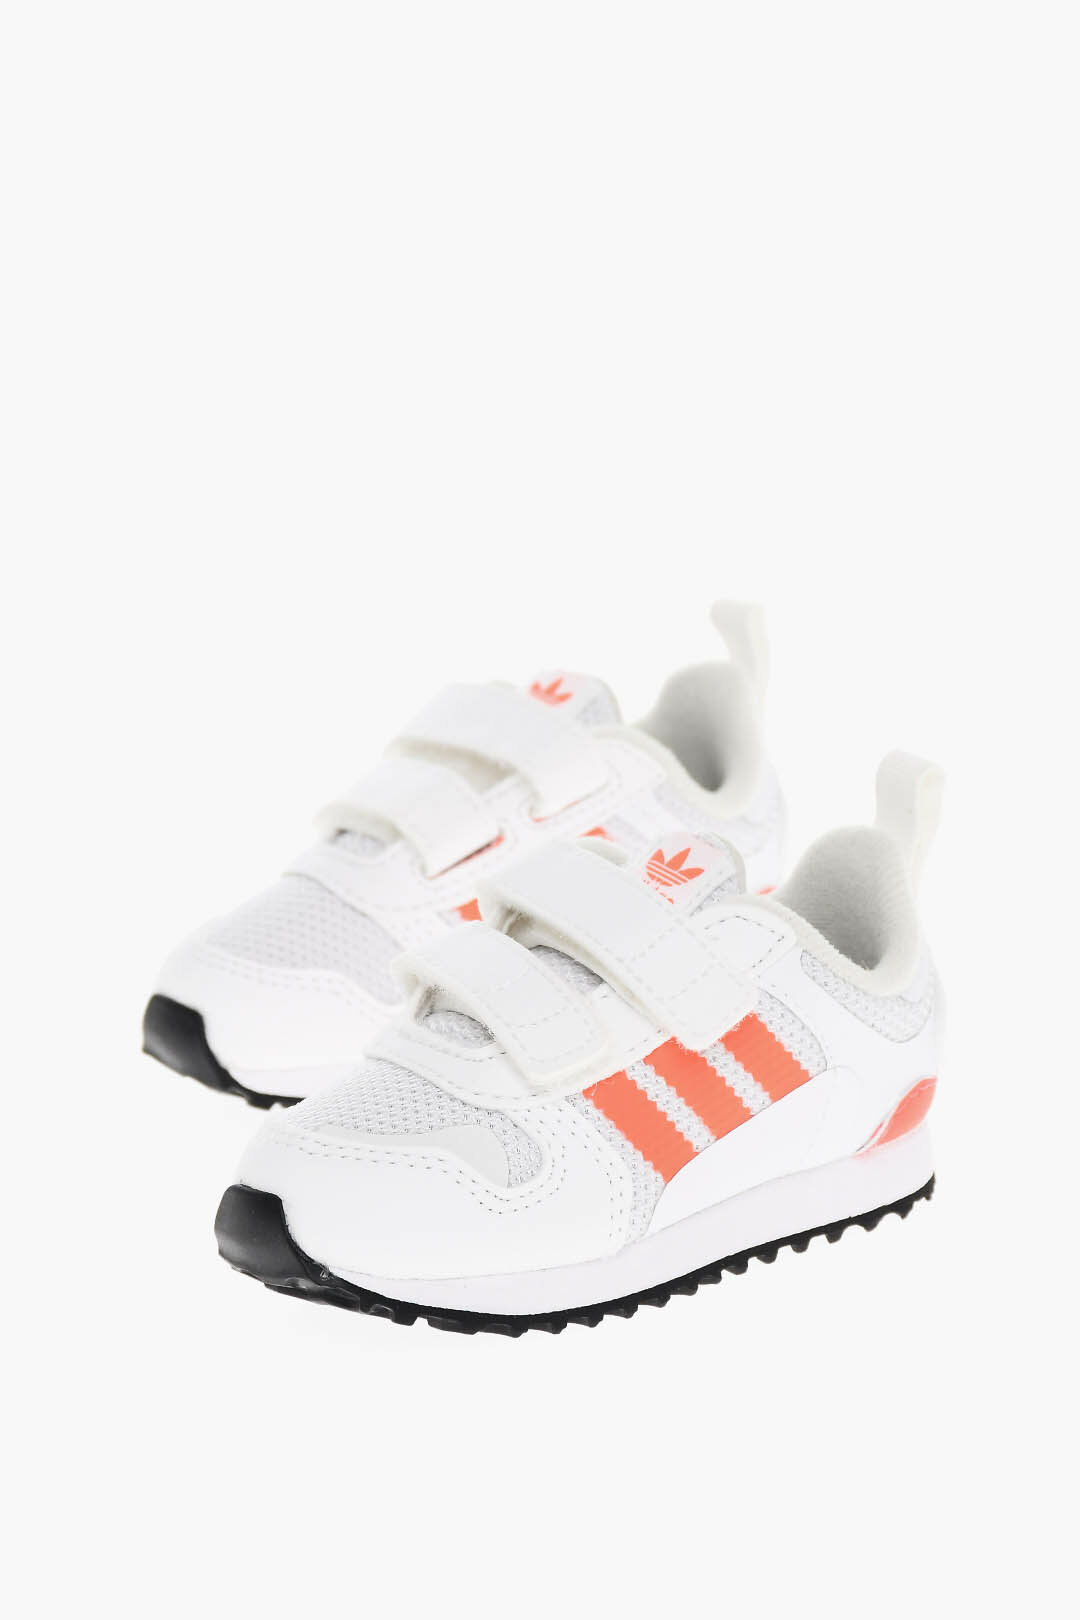 Tanzania perle Forløber Adidas Kids ZX 700 HD CF Low Sneakers with Velcro Fastening boys - Glamood  Outlet